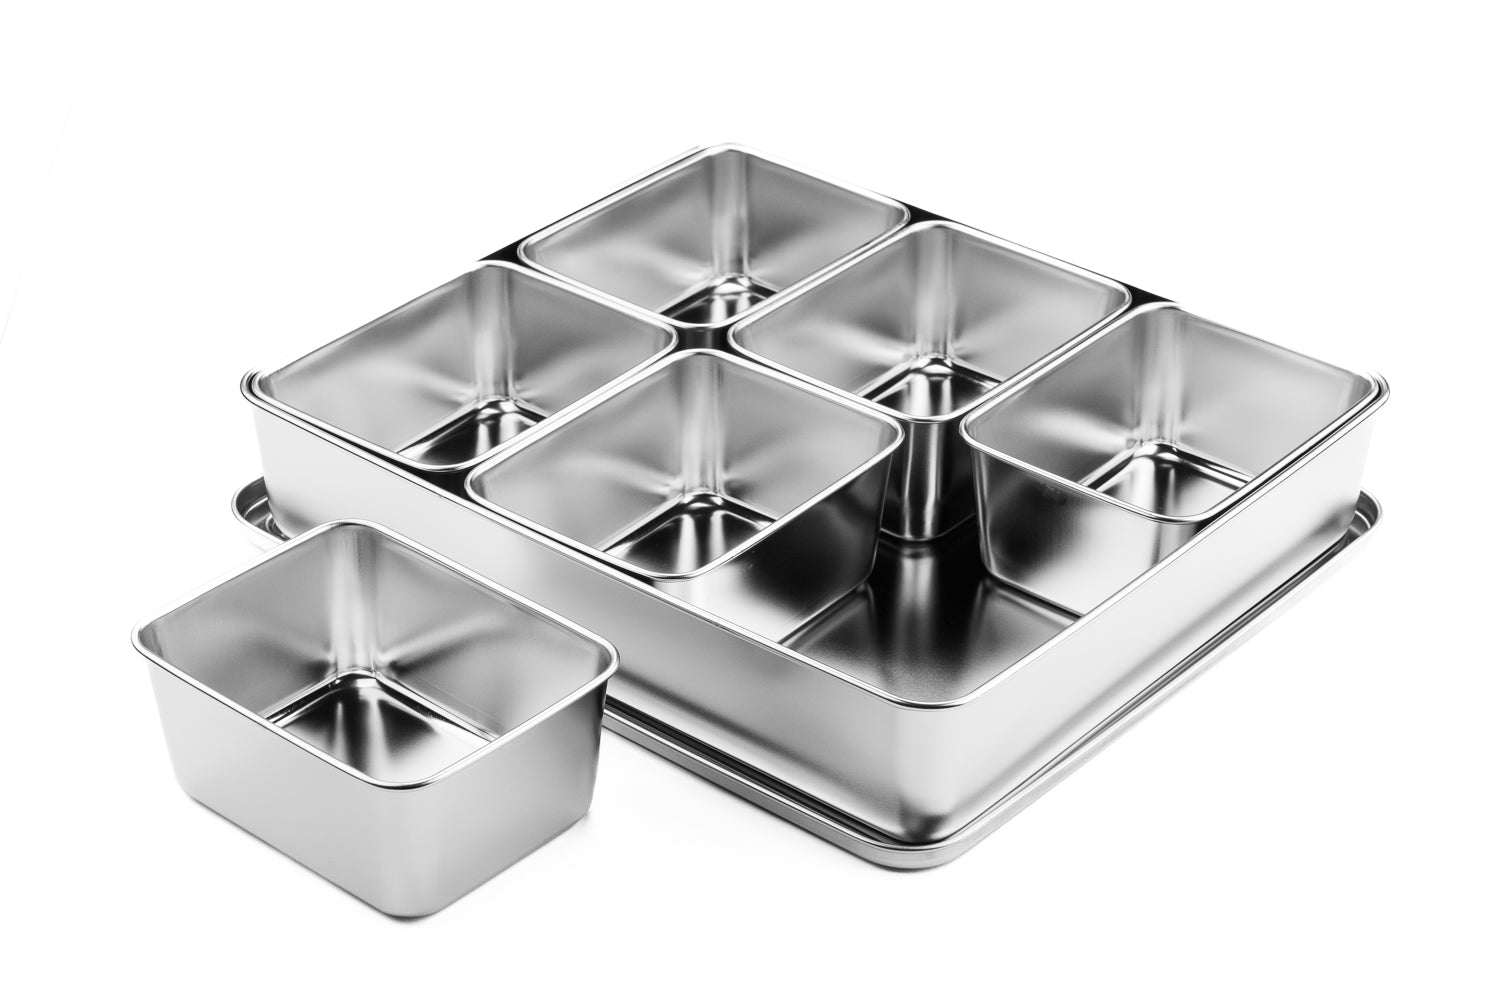 JAPANESE STAINLESS STEEL 6 YAKUMI SMALL GASTRONORM PANS SET** – KATABA  Japanese Knife Specialists